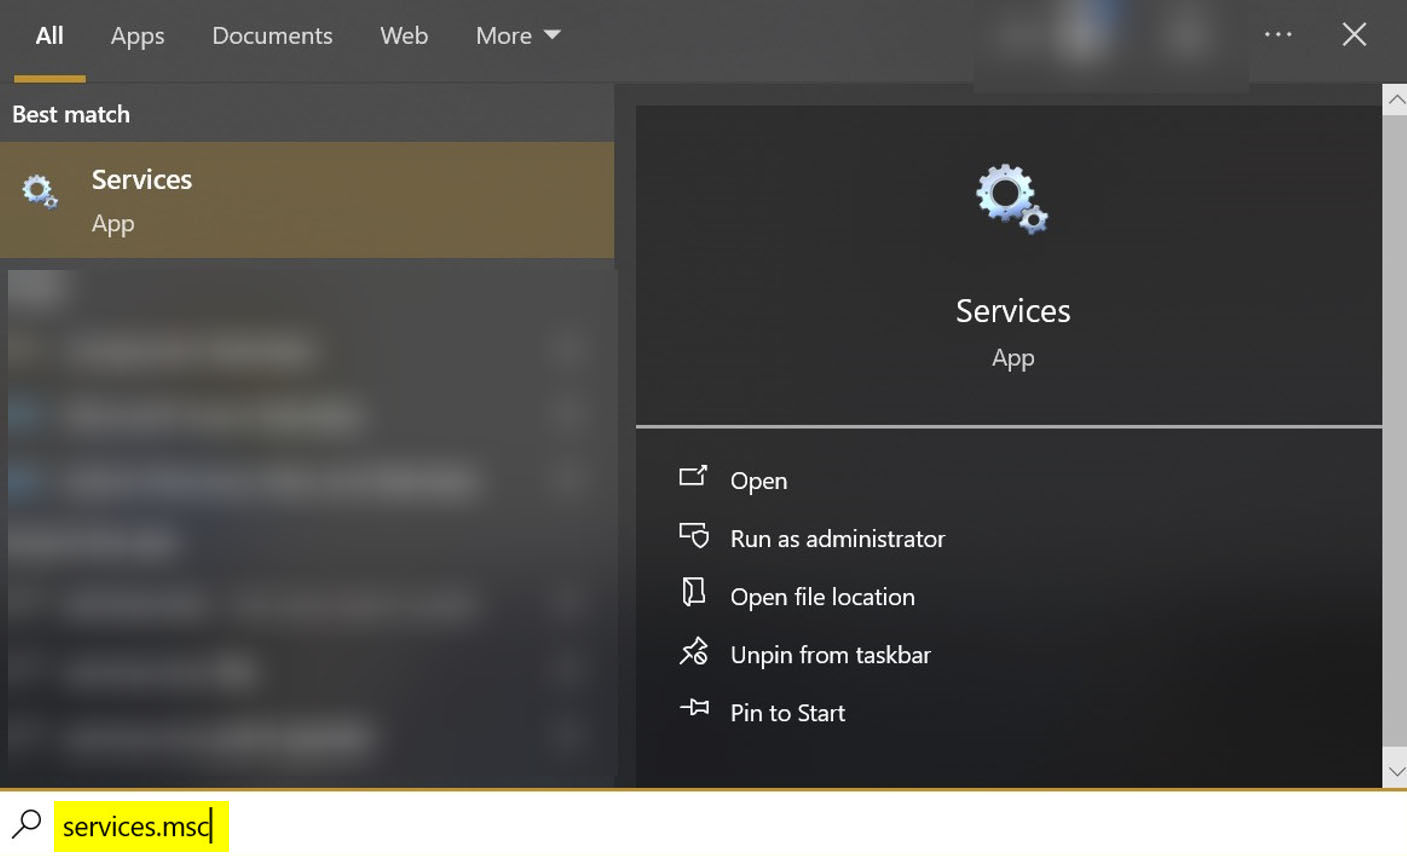 Opened the start menu and typed in "services.msc".